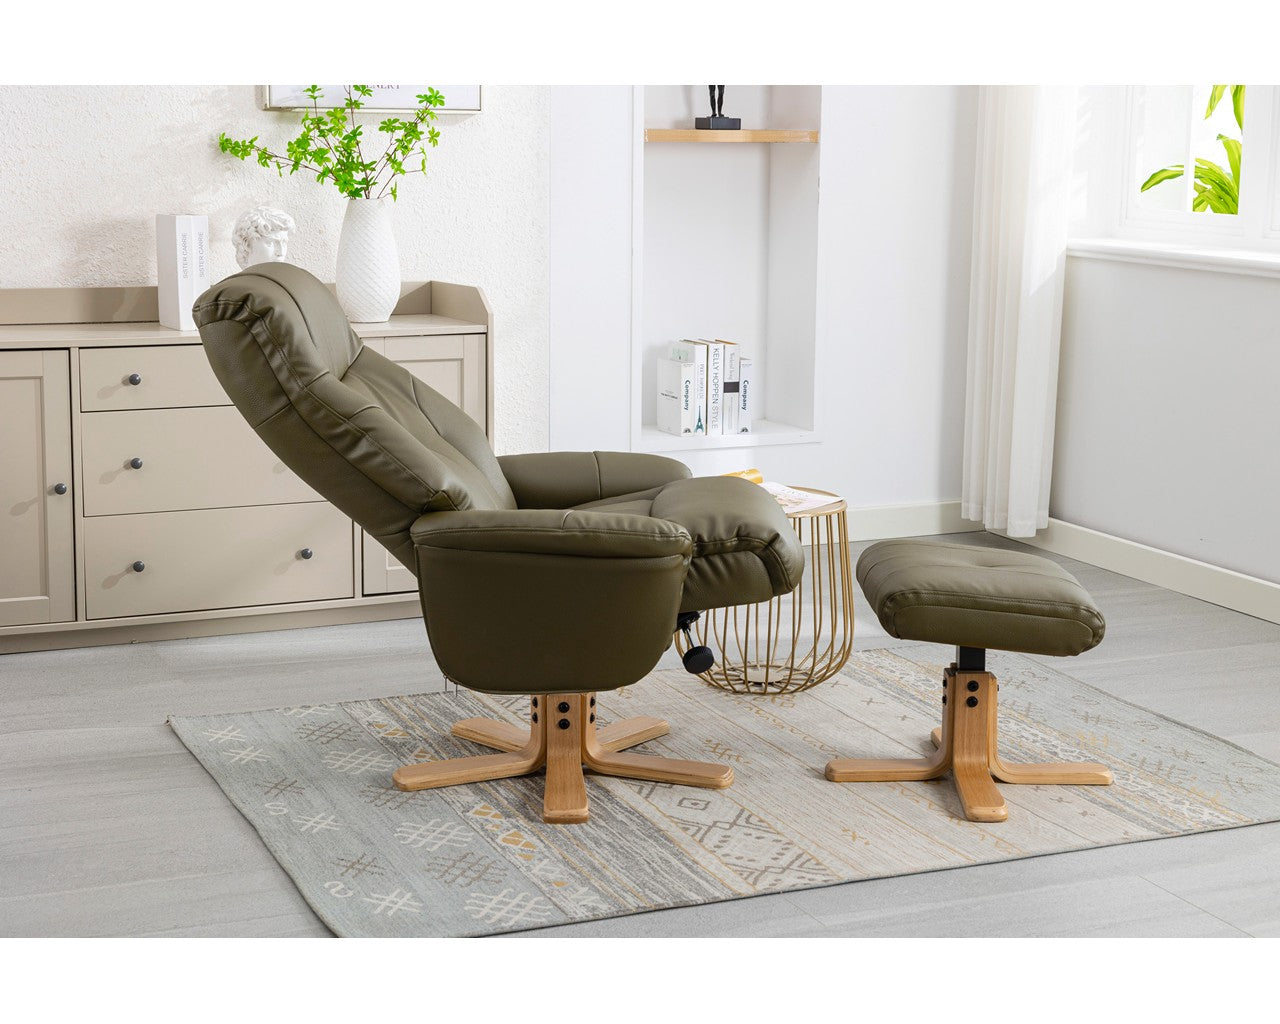 Swivel Recliner Chair Collection - Dubai: Olive Green Plush